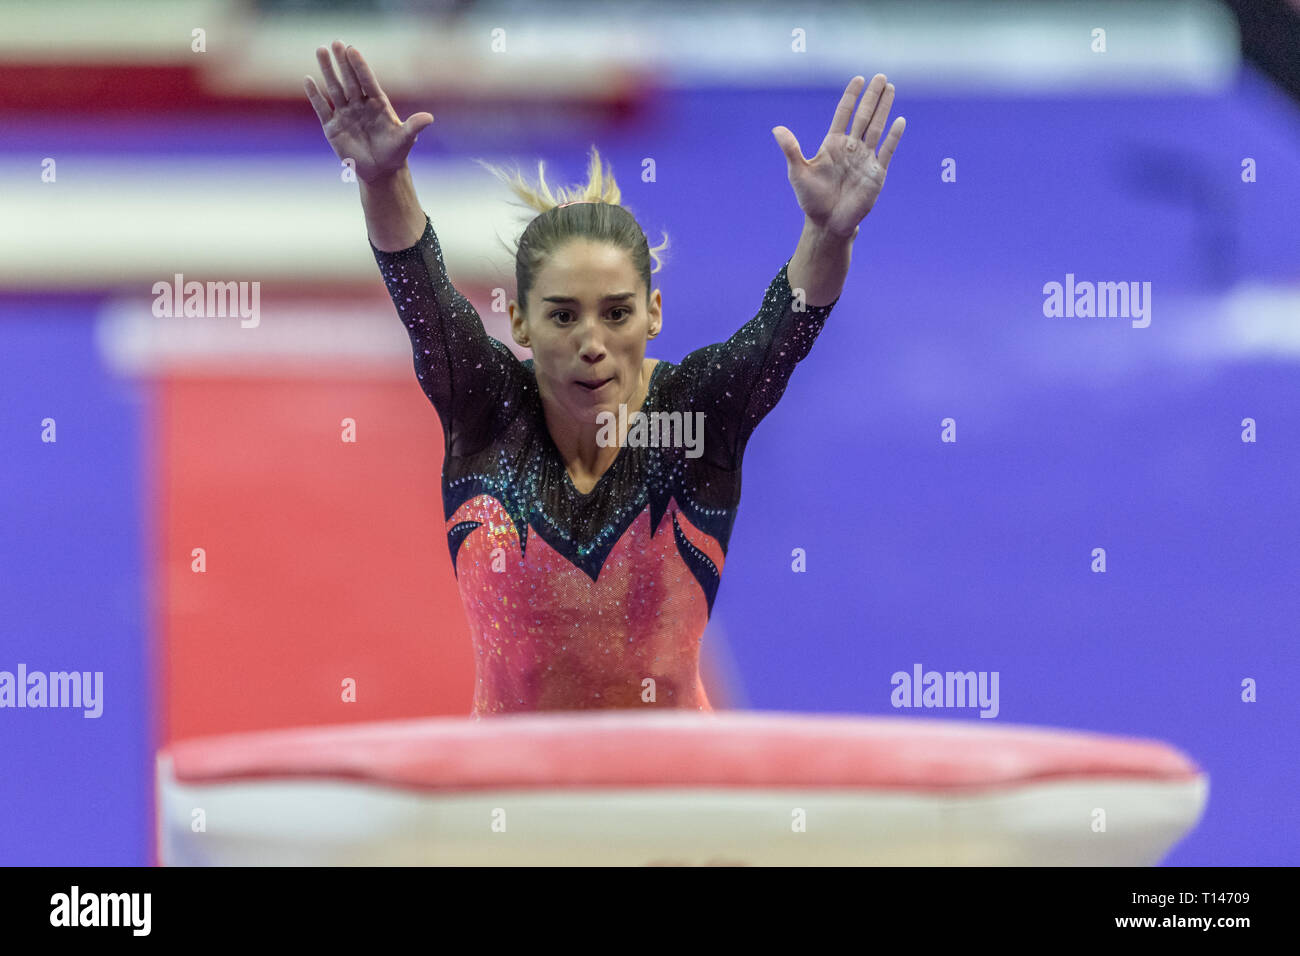 London, UK. 23rd March, 2019. Ayelen Tarabini performs on the Vault during the Matchroom Multisport presents the 2019 Superstars of Gymnastics at The O2 Arena on Saturday, 23 March 2019. LONDON ENGLAND. Credit: Taka G Wu/Alamy News Stock Photo